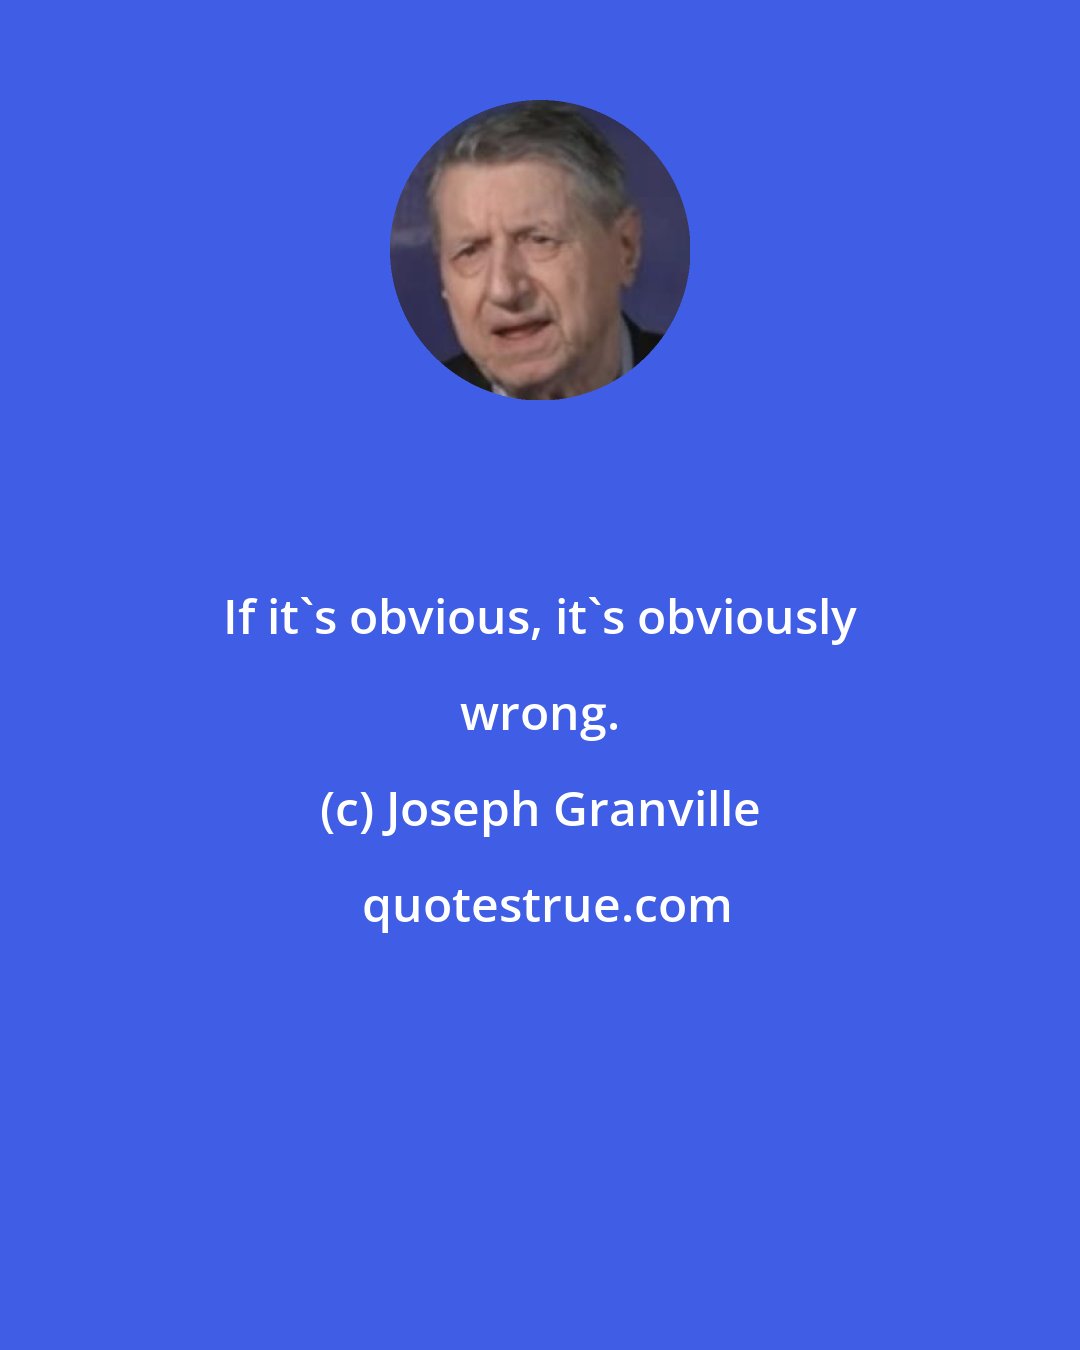 Joseph Granville: If it's obvious, it's obviously wrong.